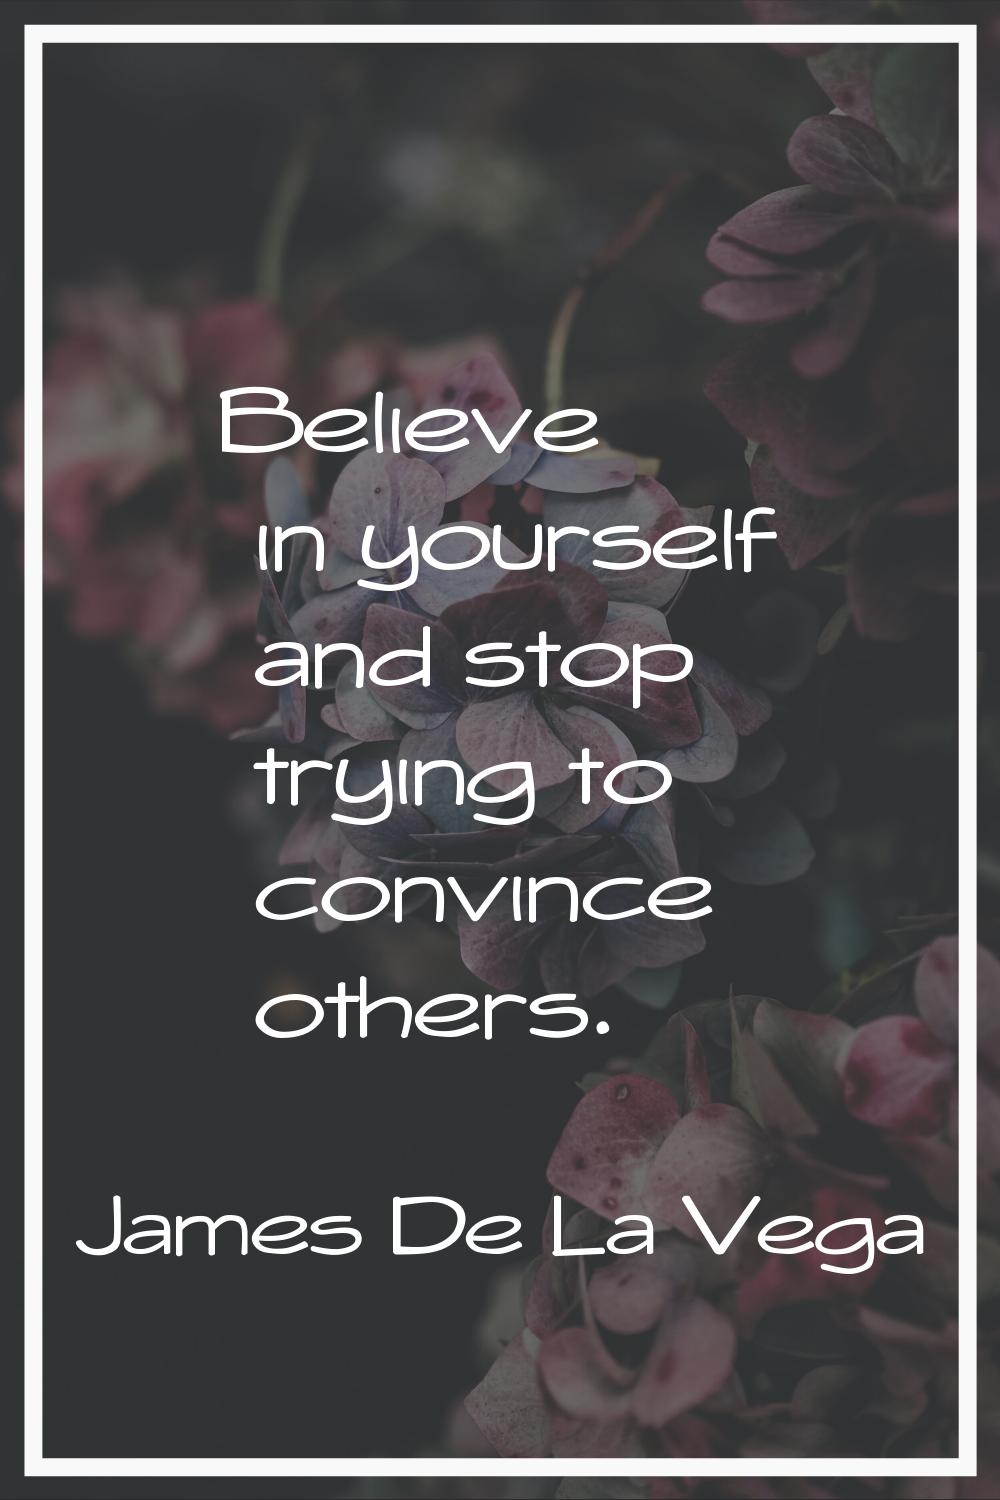 Believe in yourself and stop trying to convince others.